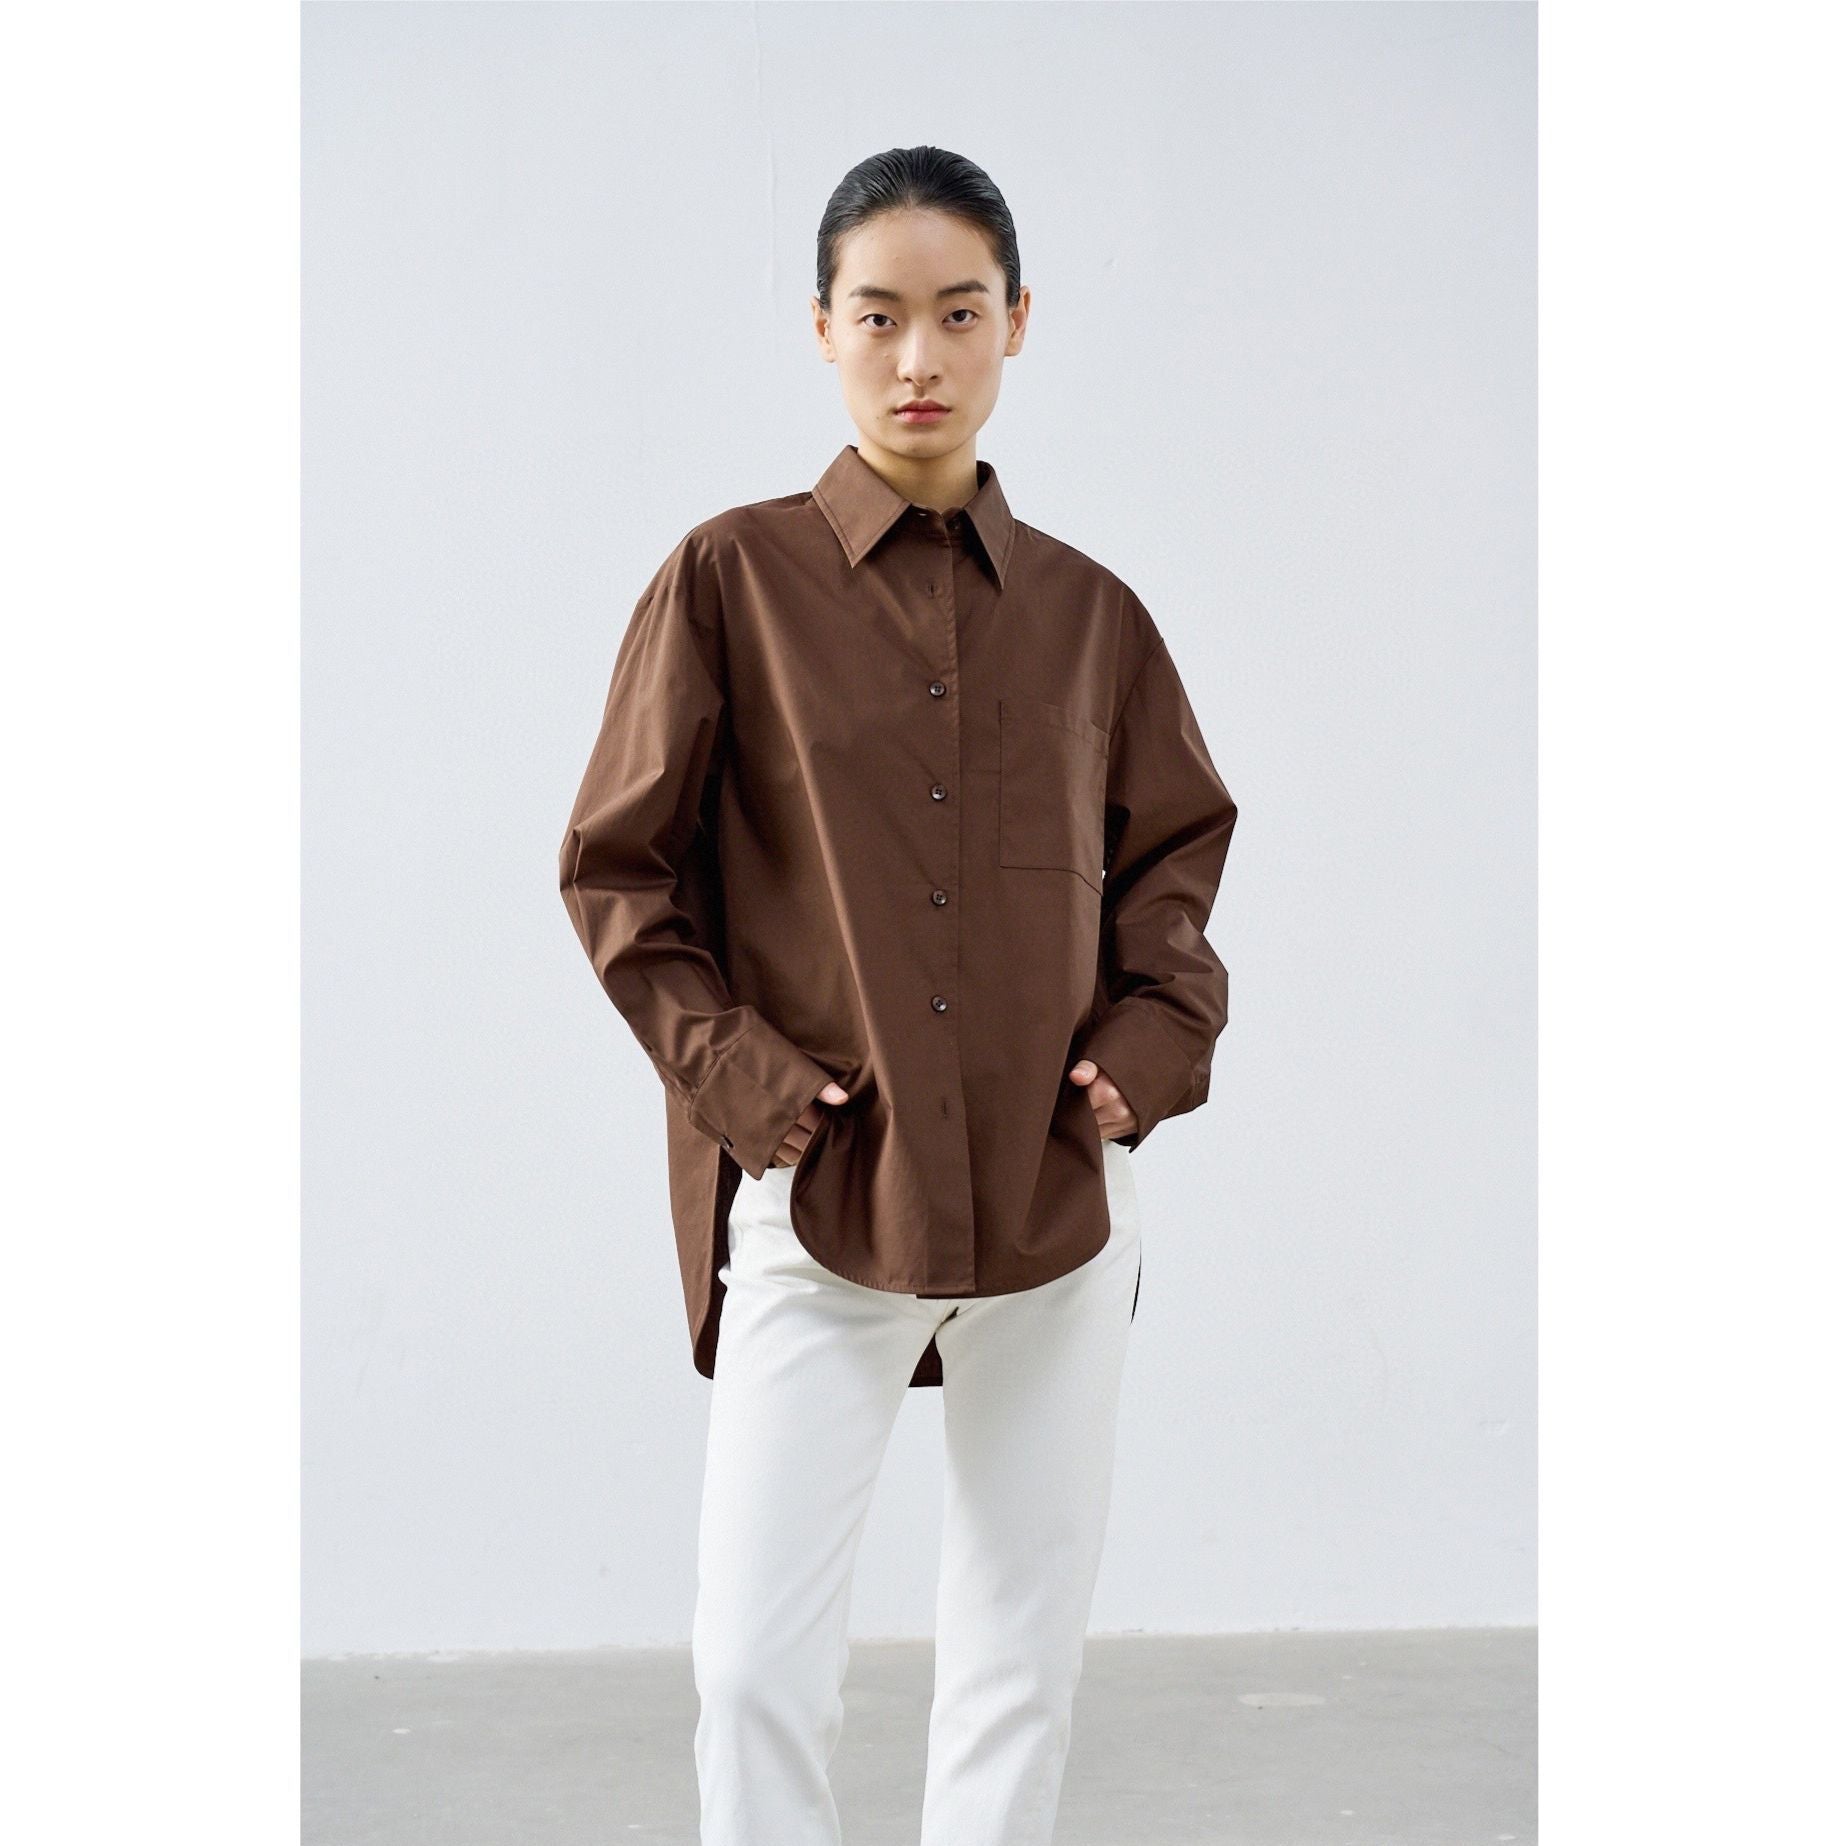 New Early Autumn Cotton Fit Shirt  UponBasics Coffee S 